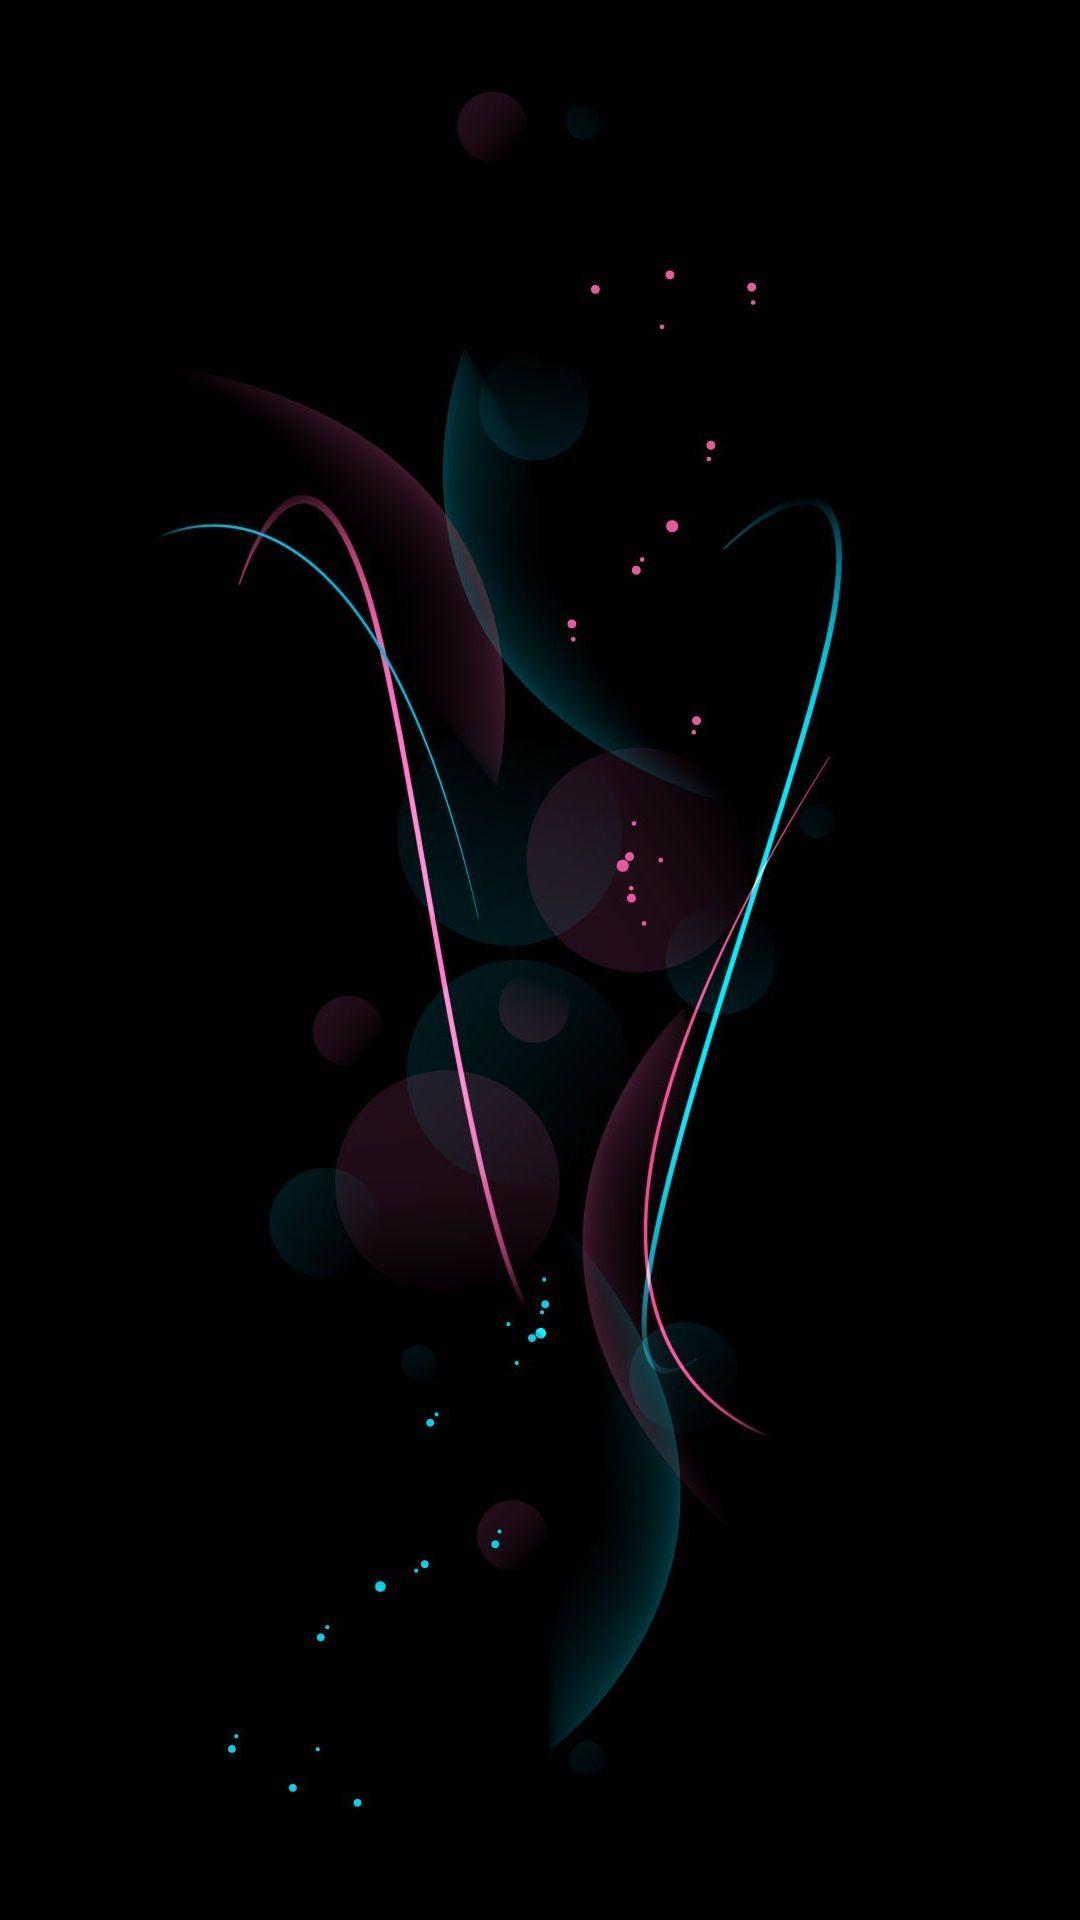 Full Black Android Wallpapers - Wallpaper Cave